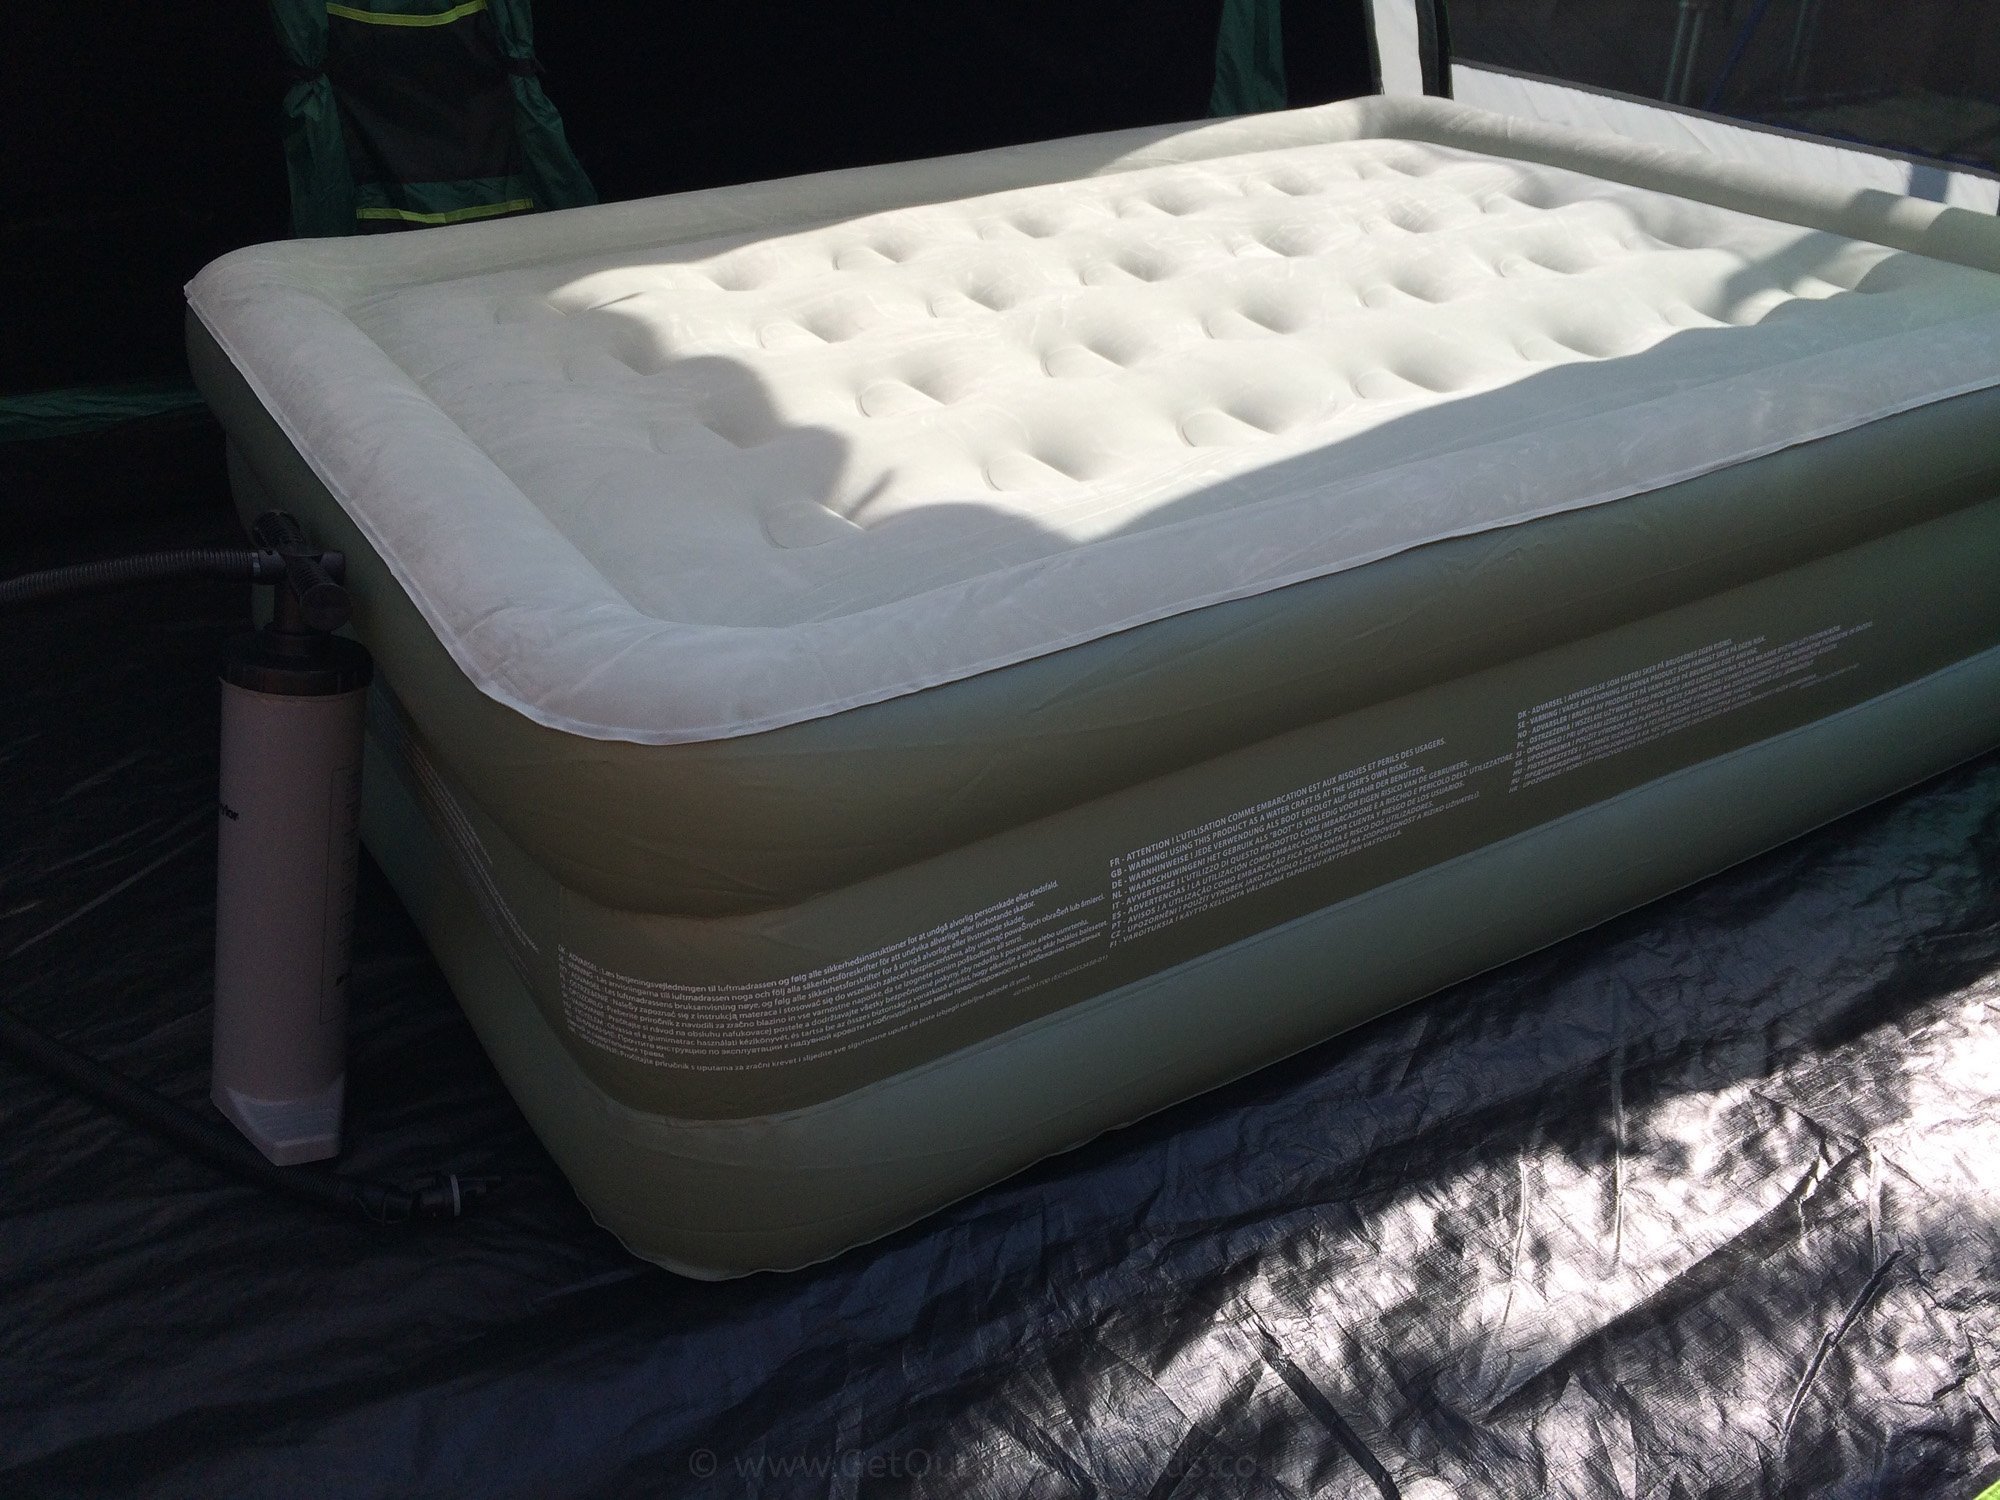 An Airbed